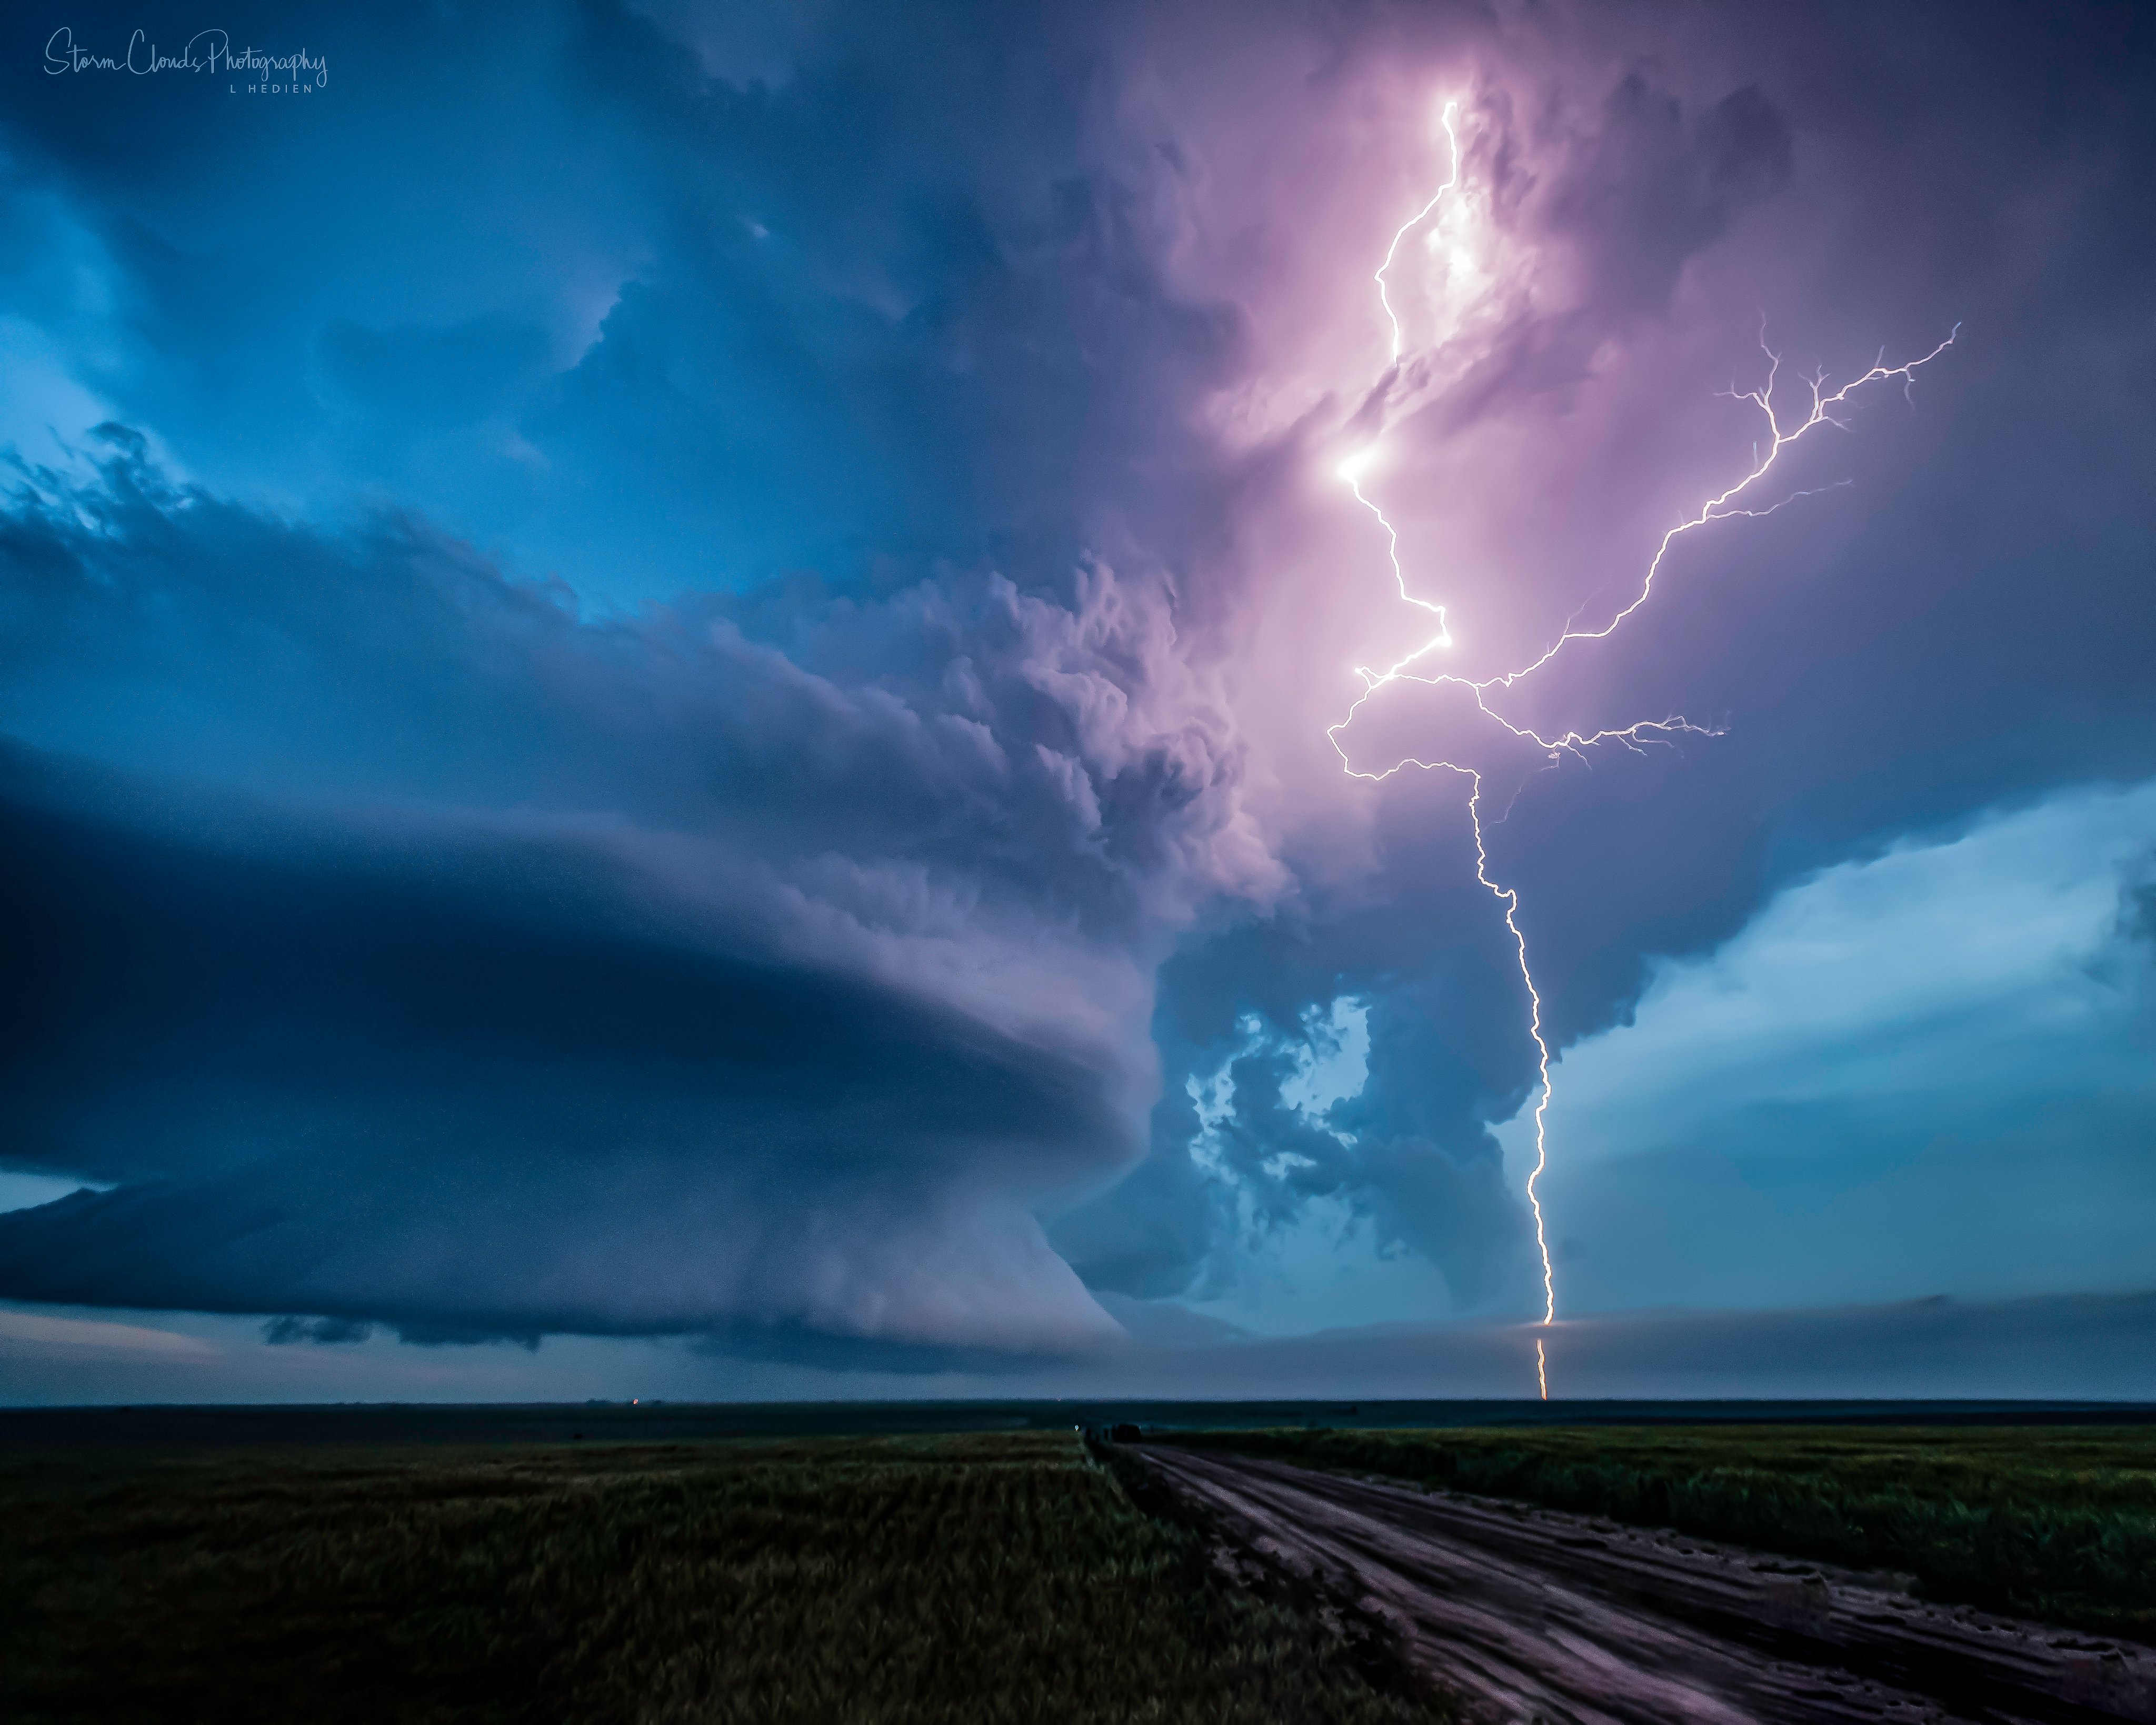 2nd Place Selden, Kansas supercell droppping lightning during a June storm by Laura Hedien- Storm Clouds Photography @lhedien